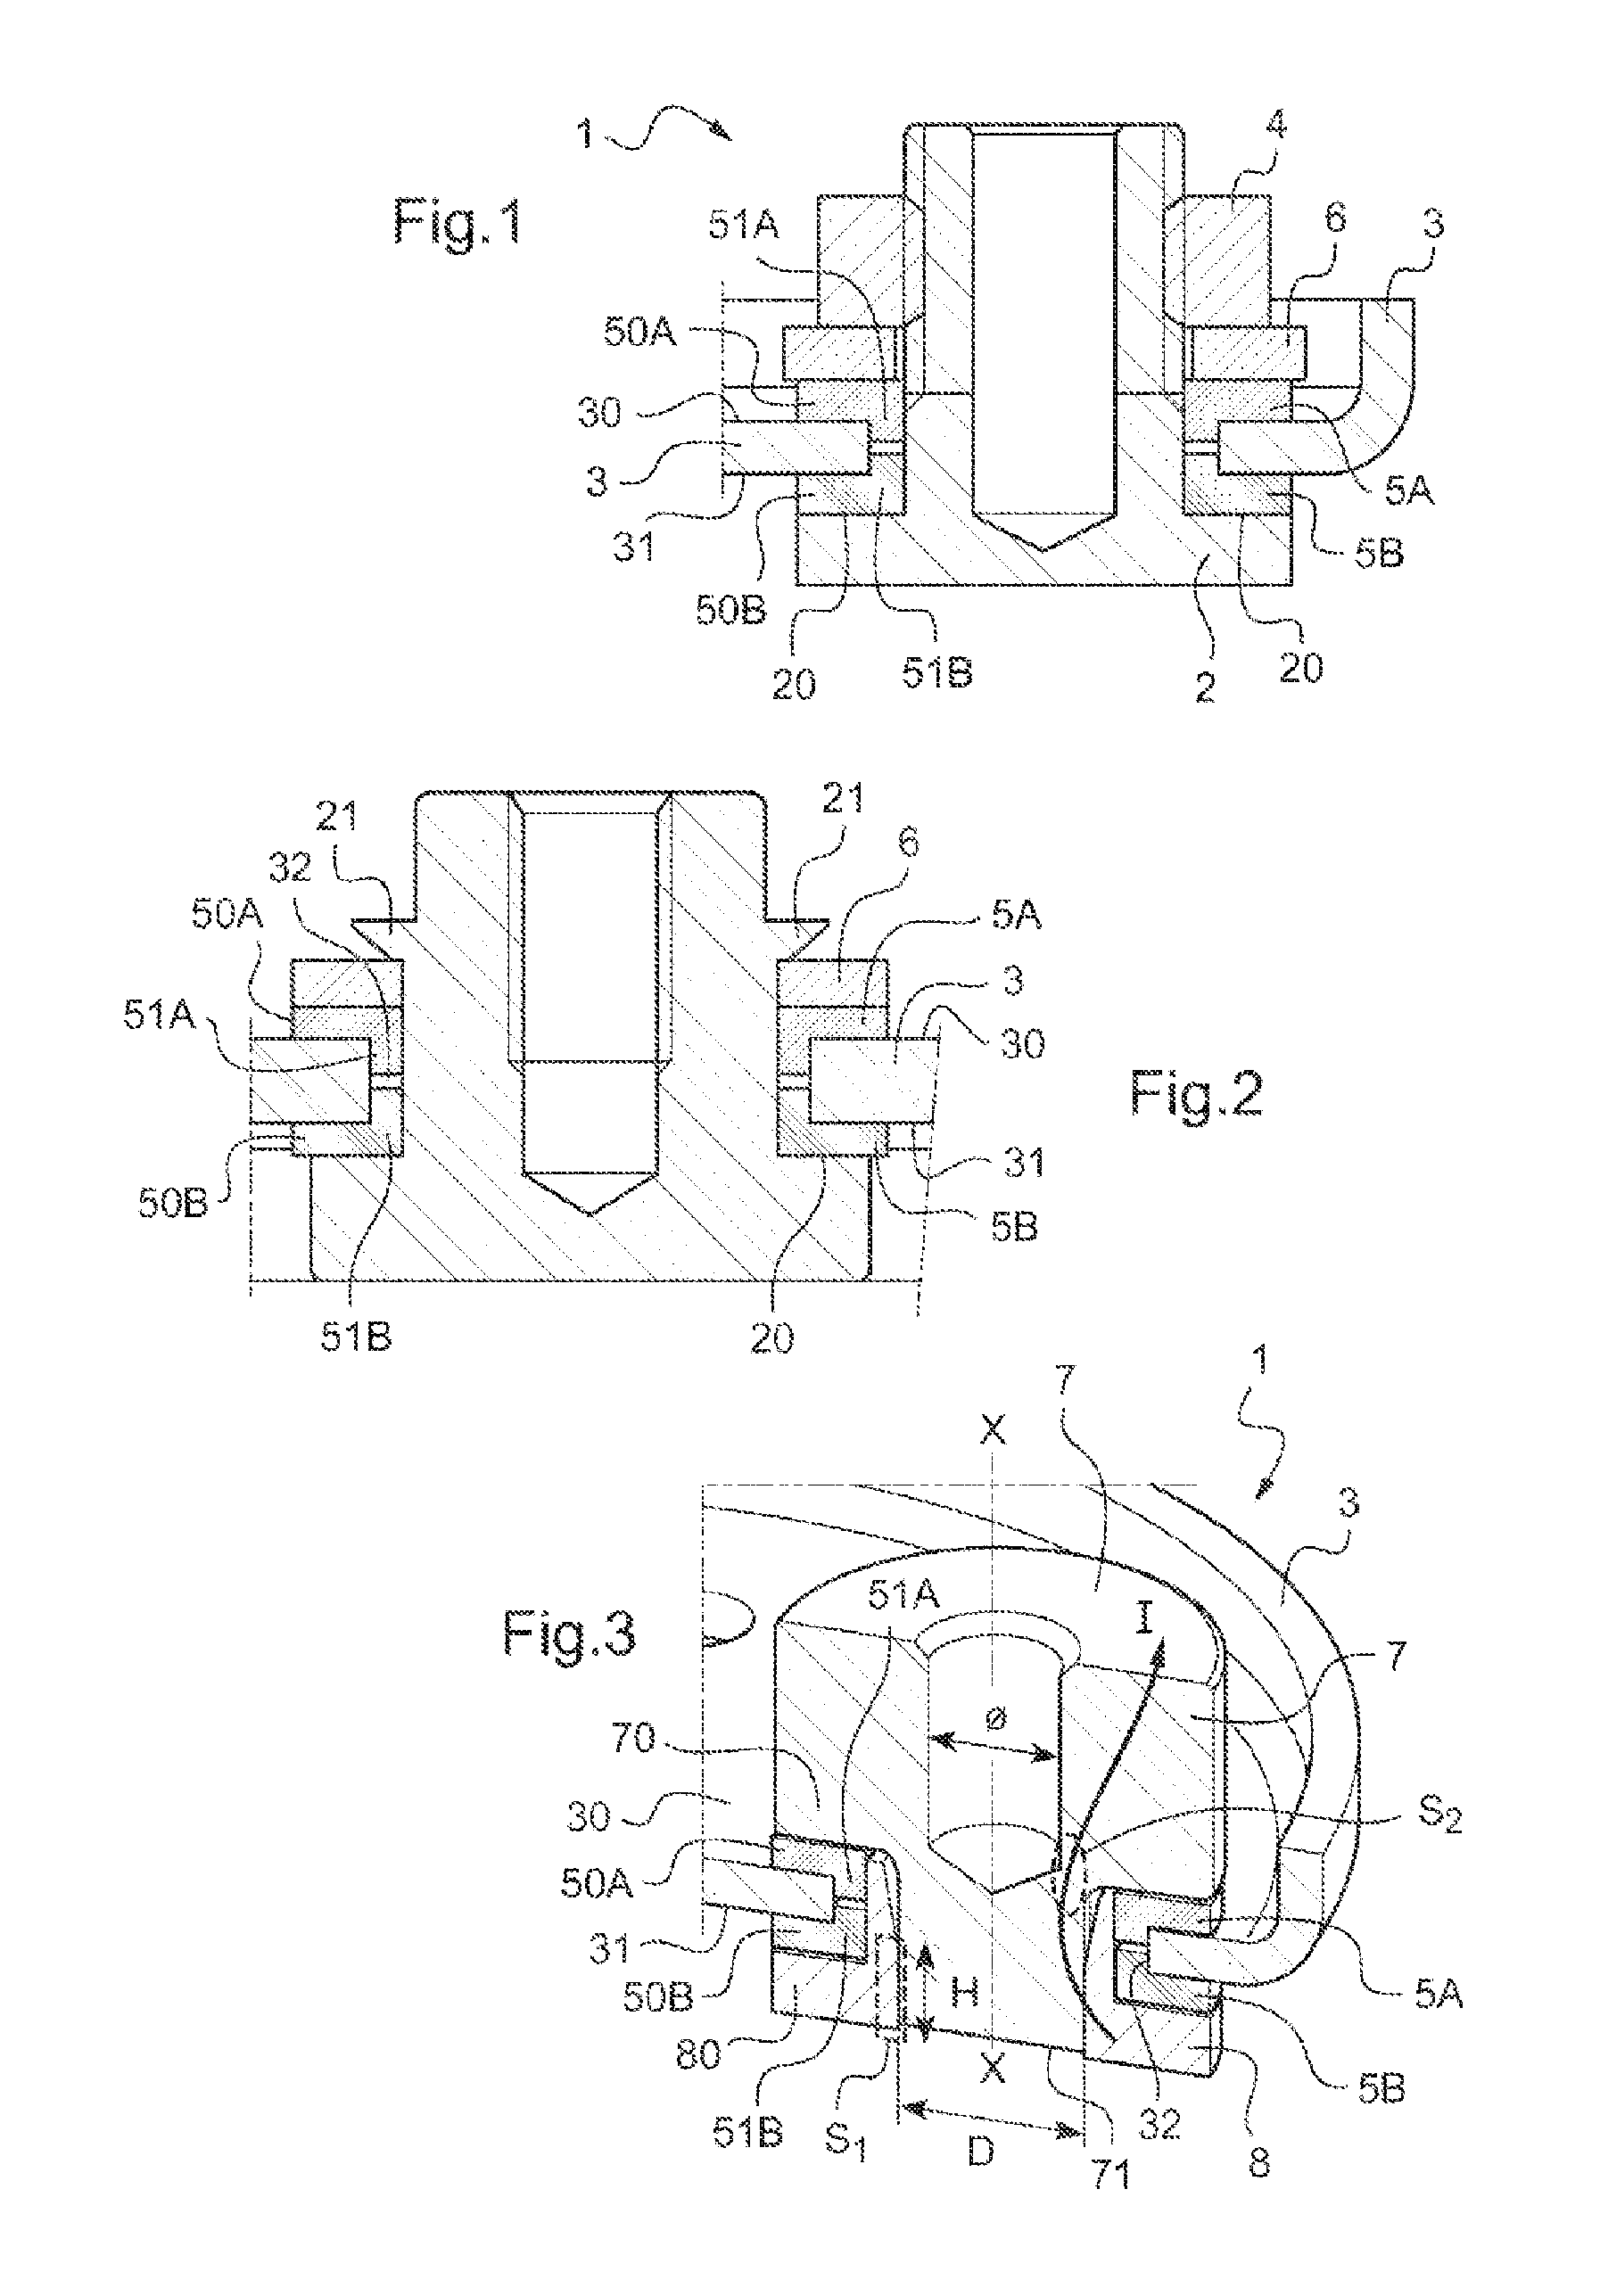 Bushing Forming a Terminal for a Lithium Storage Battery and Related Storage Battery